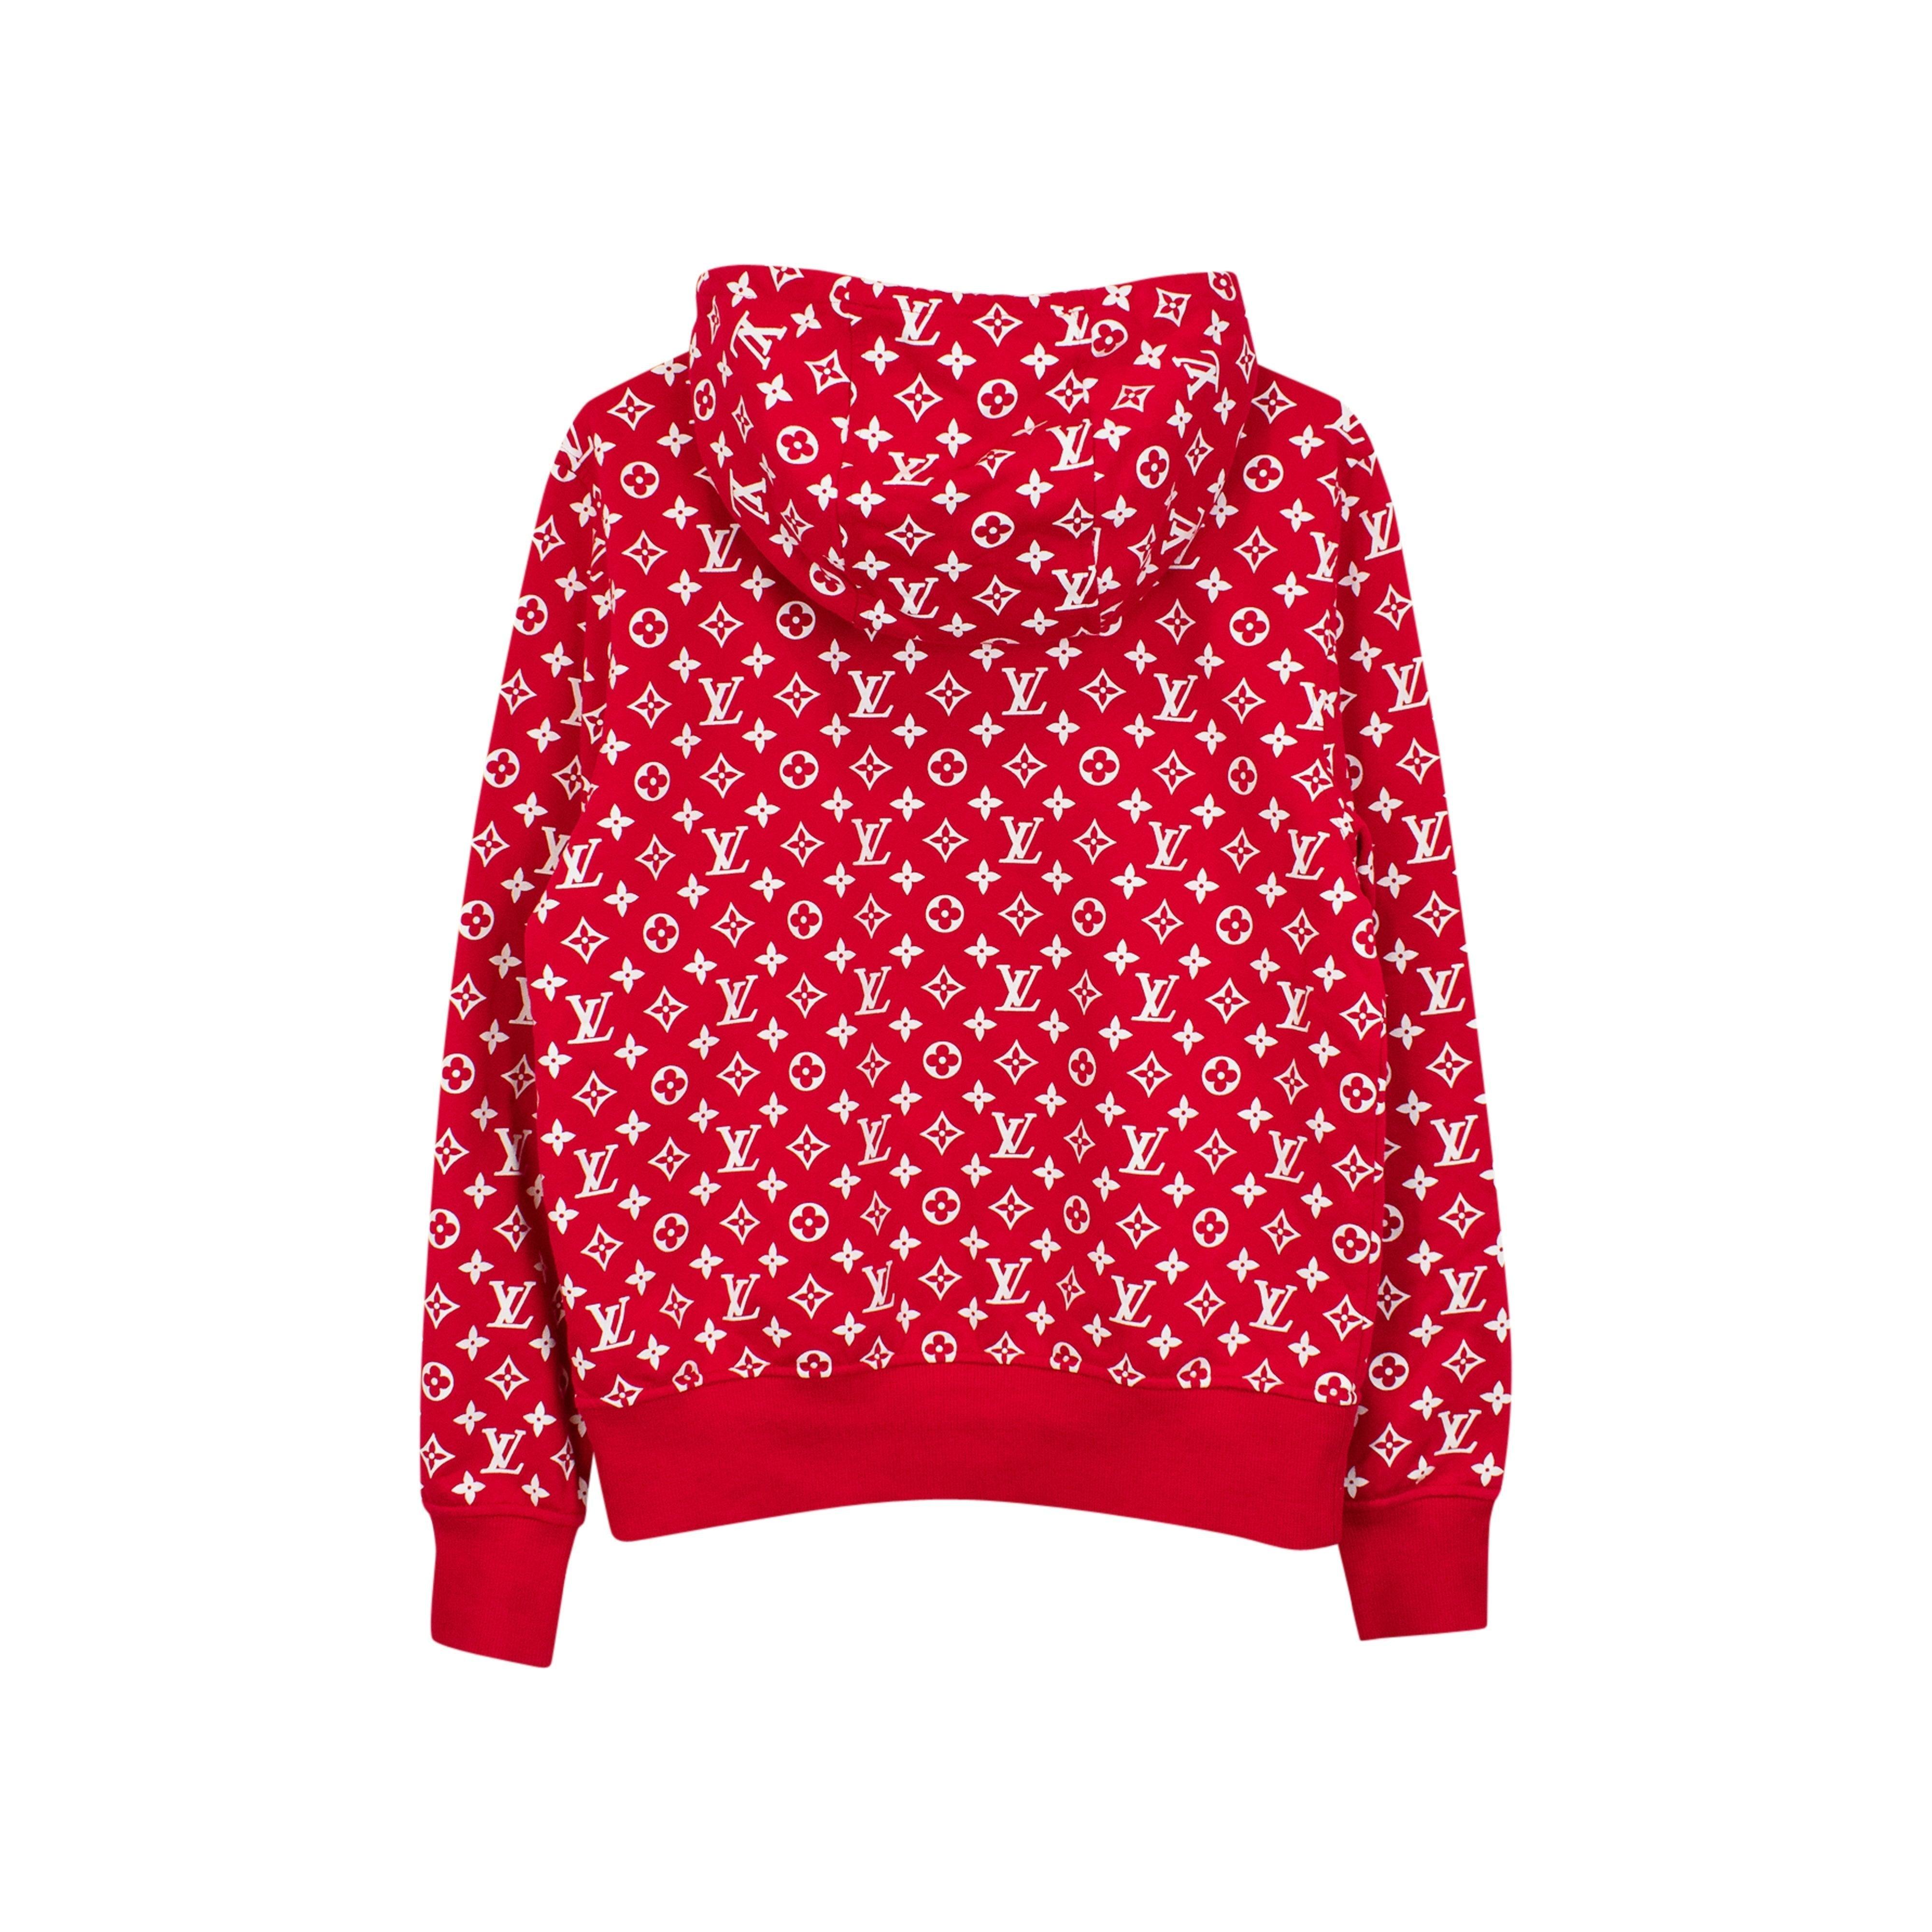 Supreme X Louis Vuitton Hoodie In Red